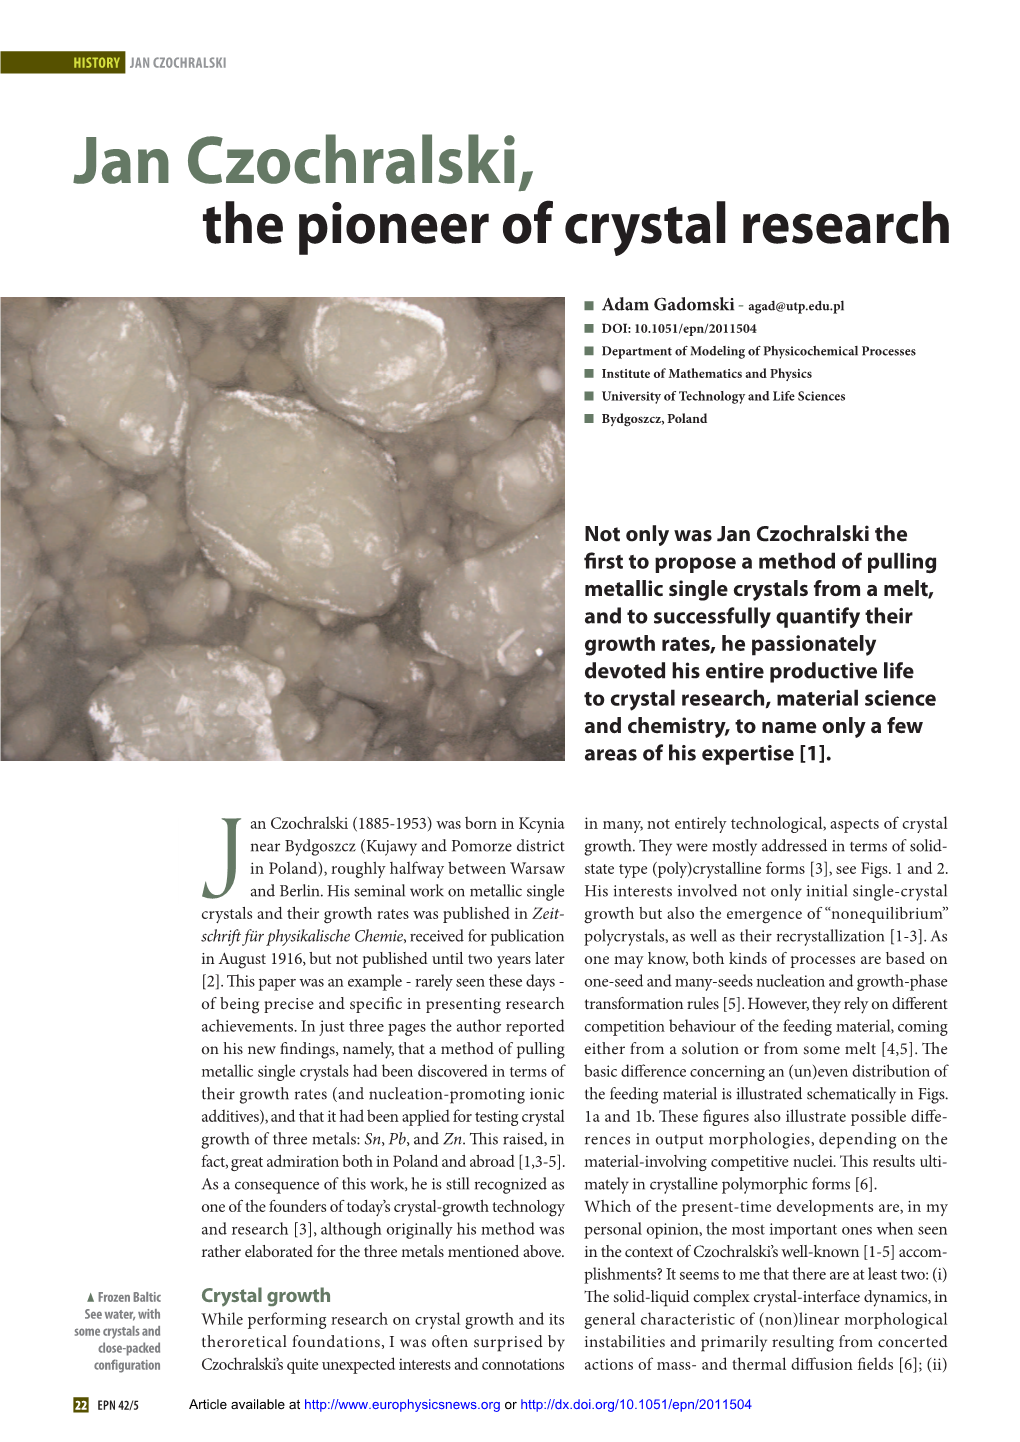 Jan Czochralski, the Pioneer of Crystal Research